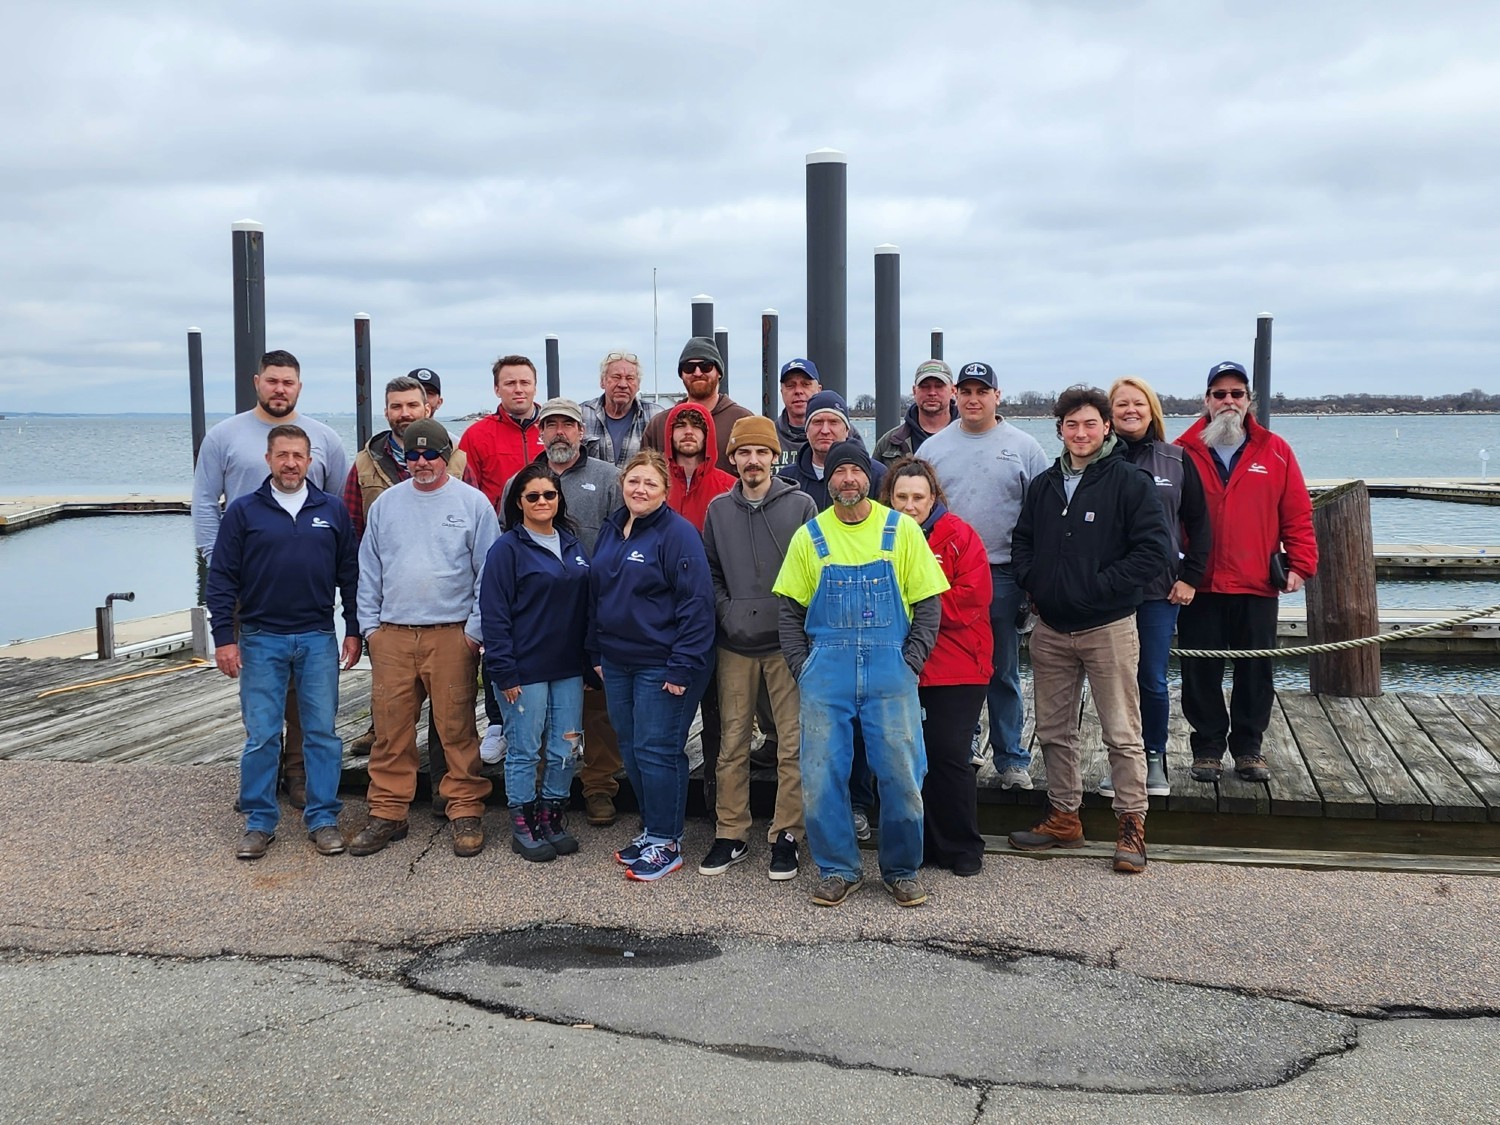 Celebrating our team during teammate appreciation day at one of our marinas in Connecticut